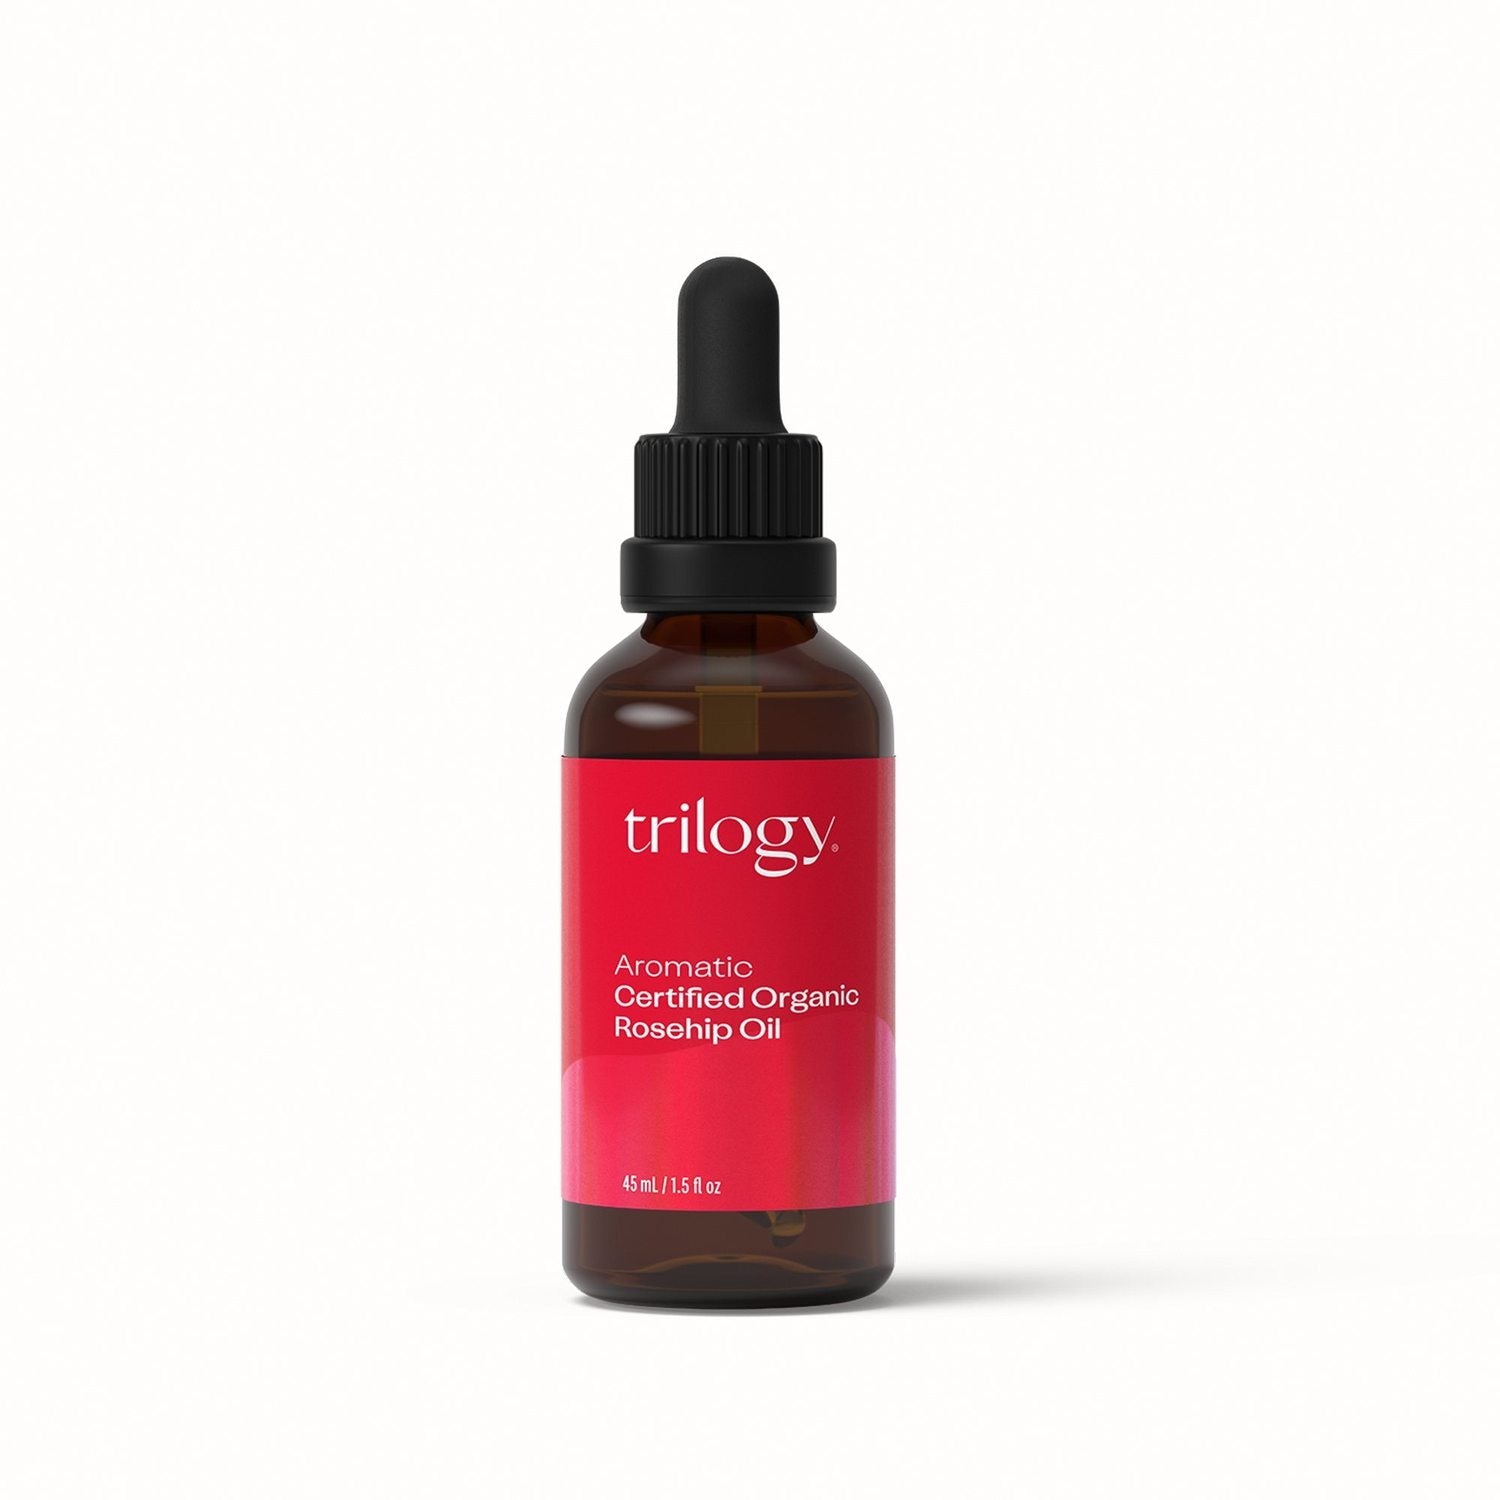 Trilogy Age-Proof Coq10 Booster Oil 20ml.